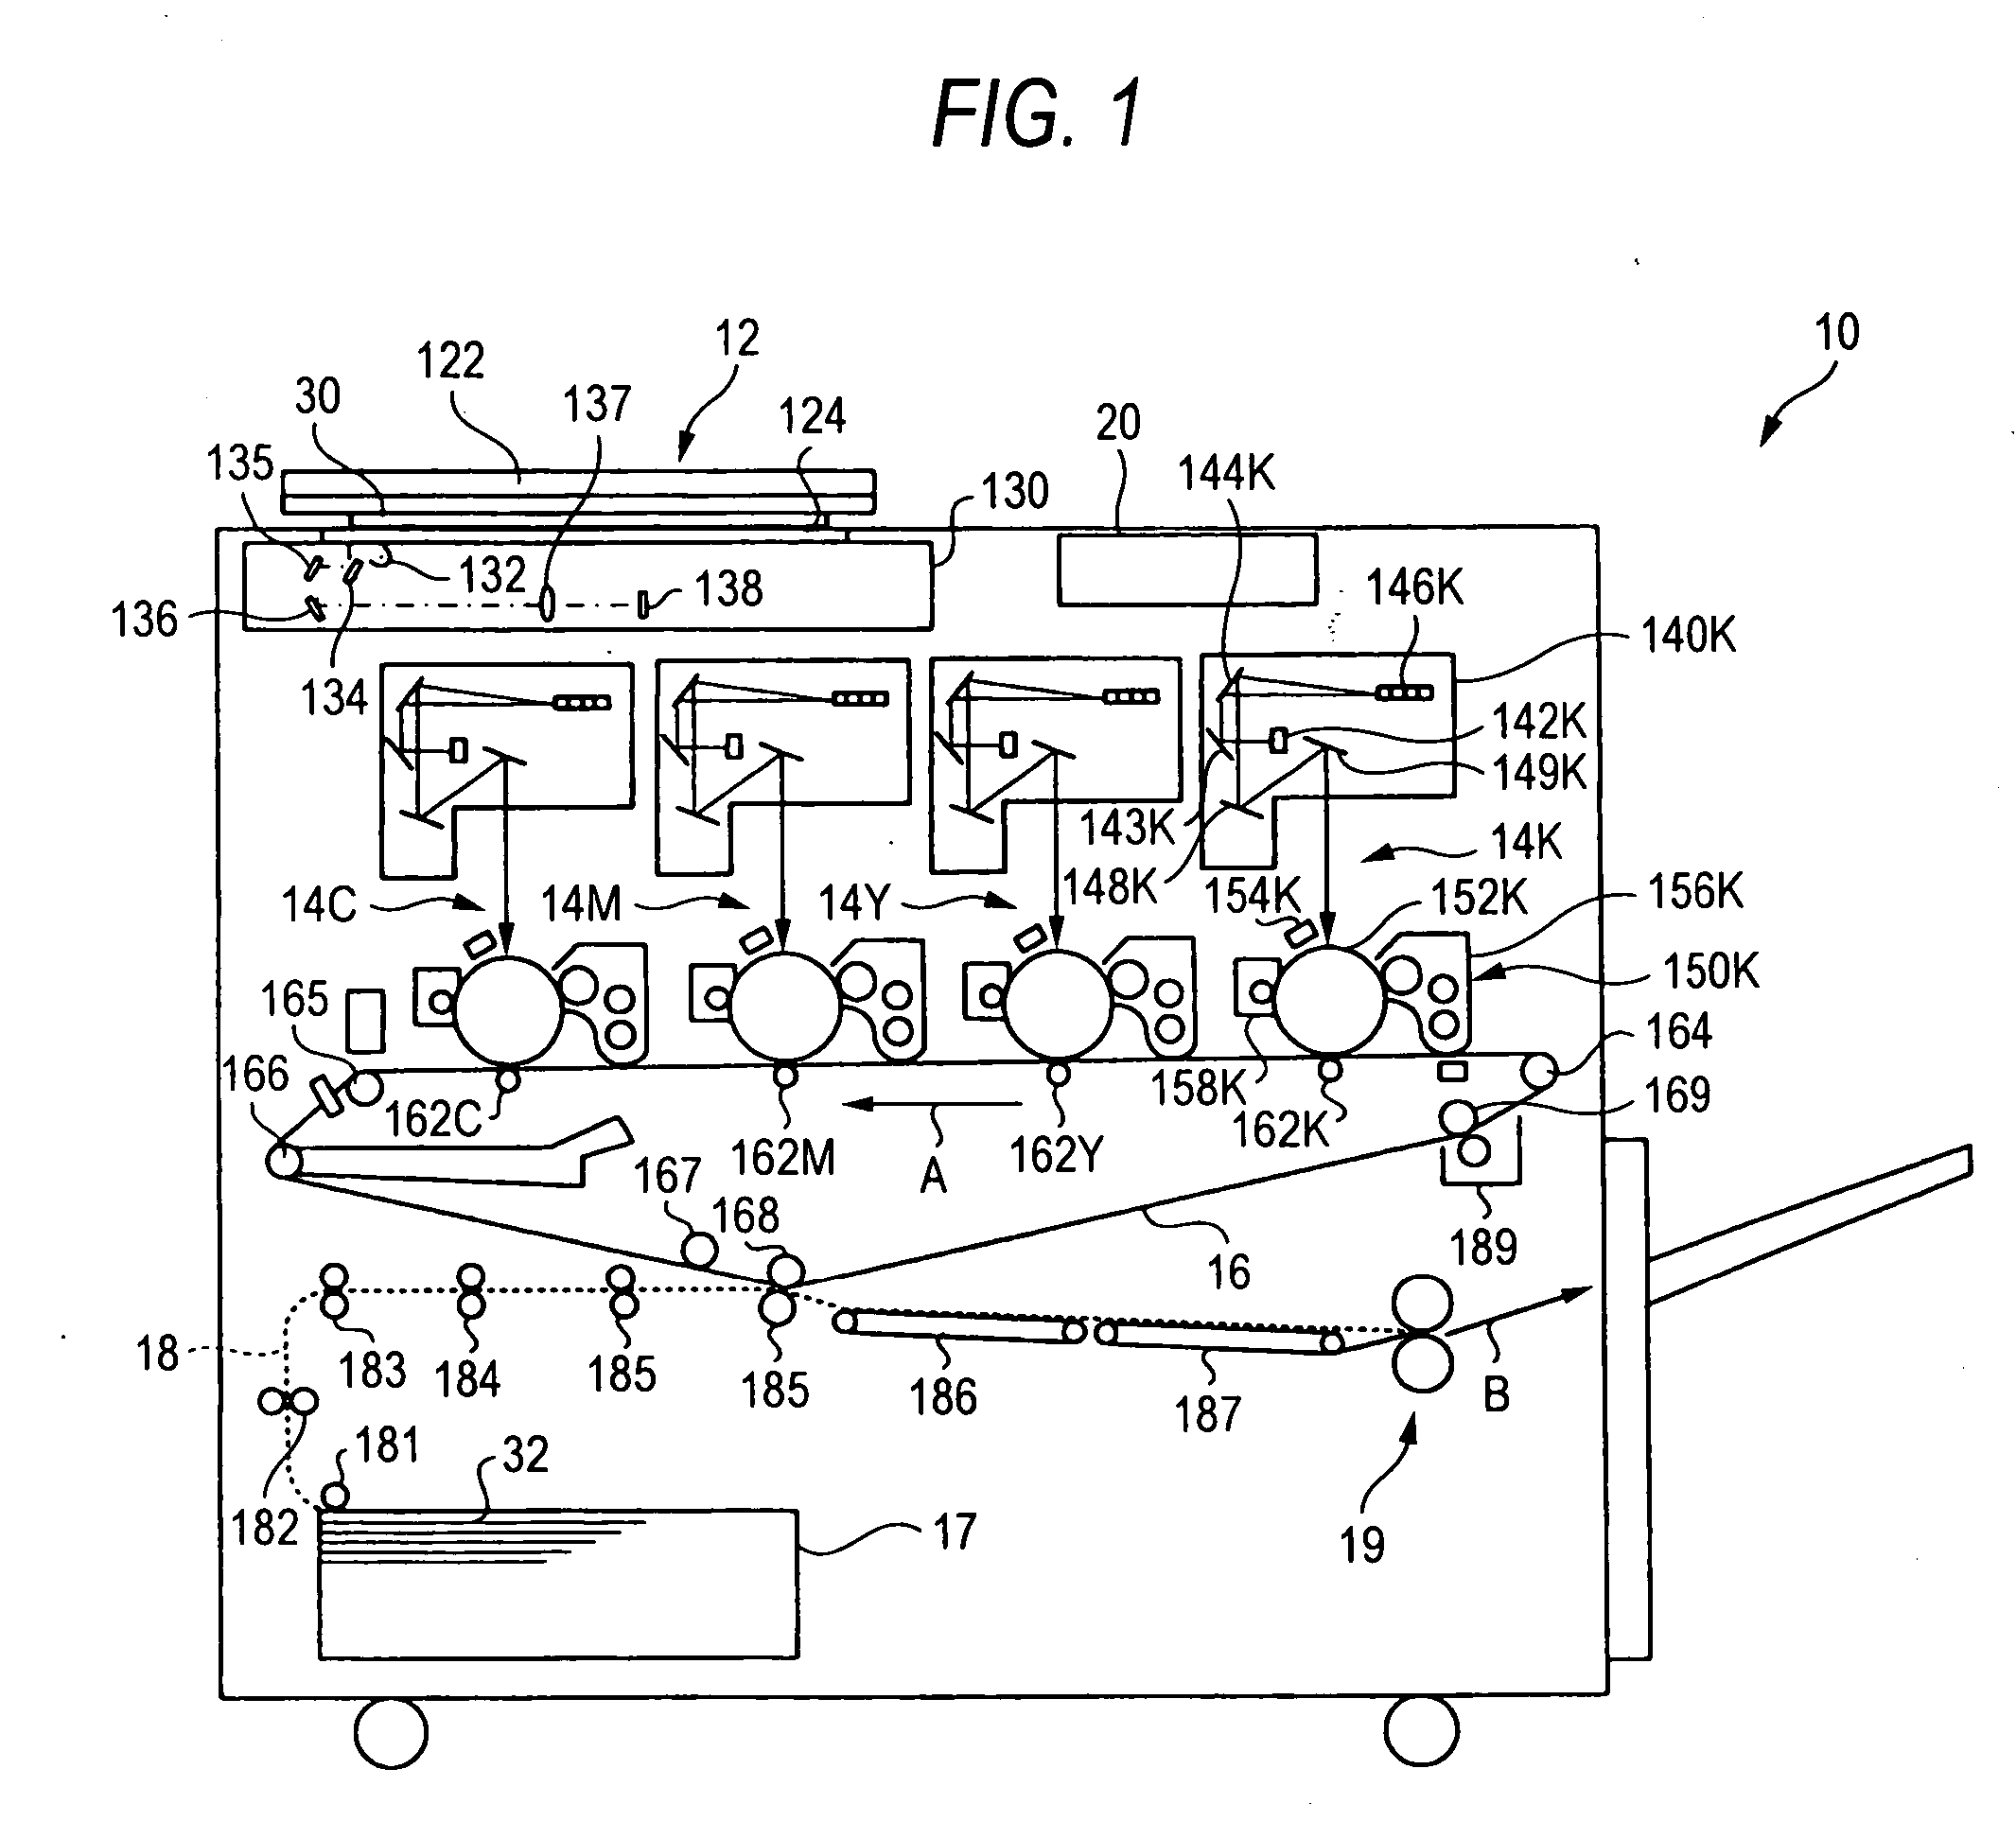 Image processor, image formation apparatus, image processing method, and program